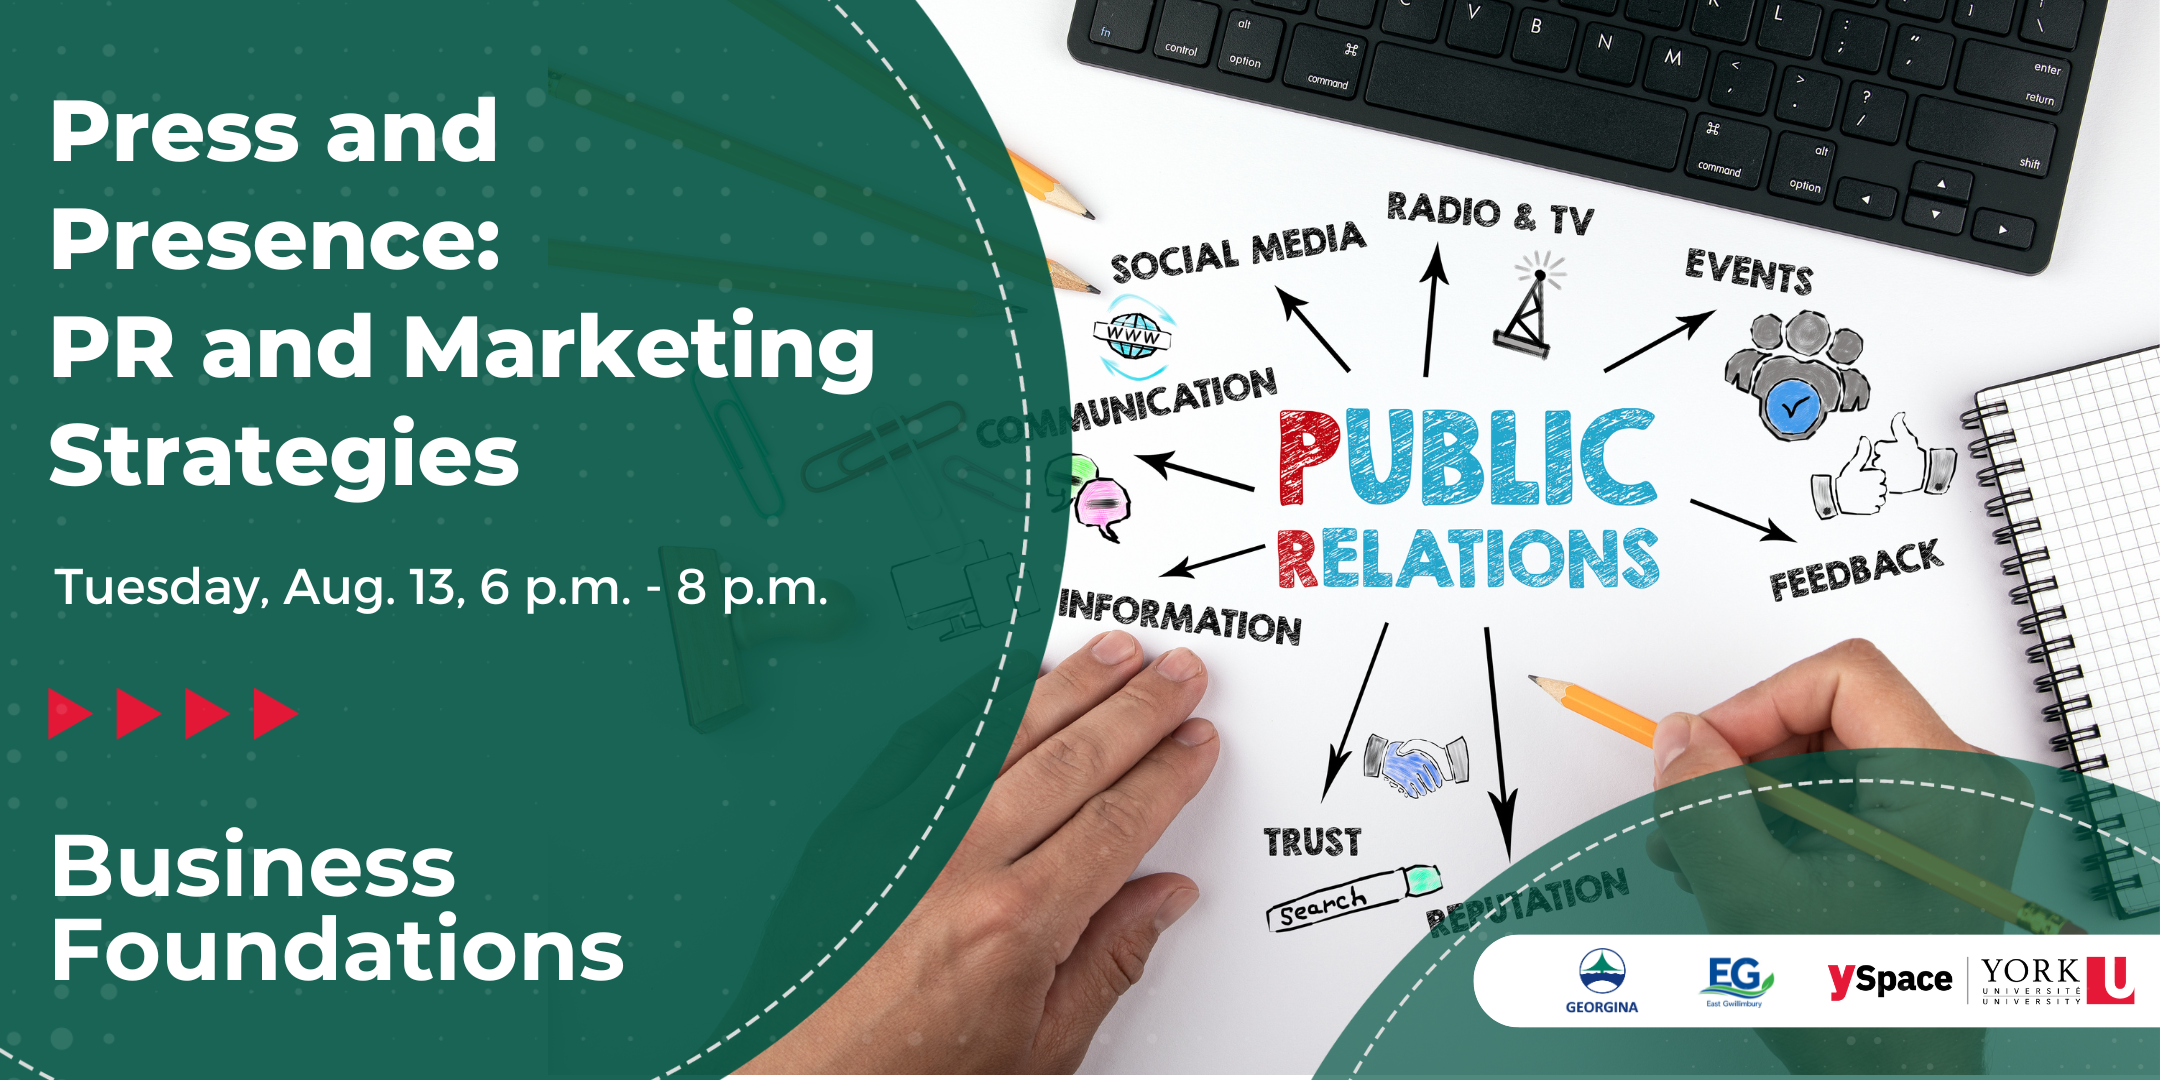 Hands writing, the words public relations in the centre with arrows pointing out to words connected to public relations with the words Press and Presence: PR and Marketing Strategies, Tuesday Aug. 13 6 p.m. - 8 p.m. Business Foundations